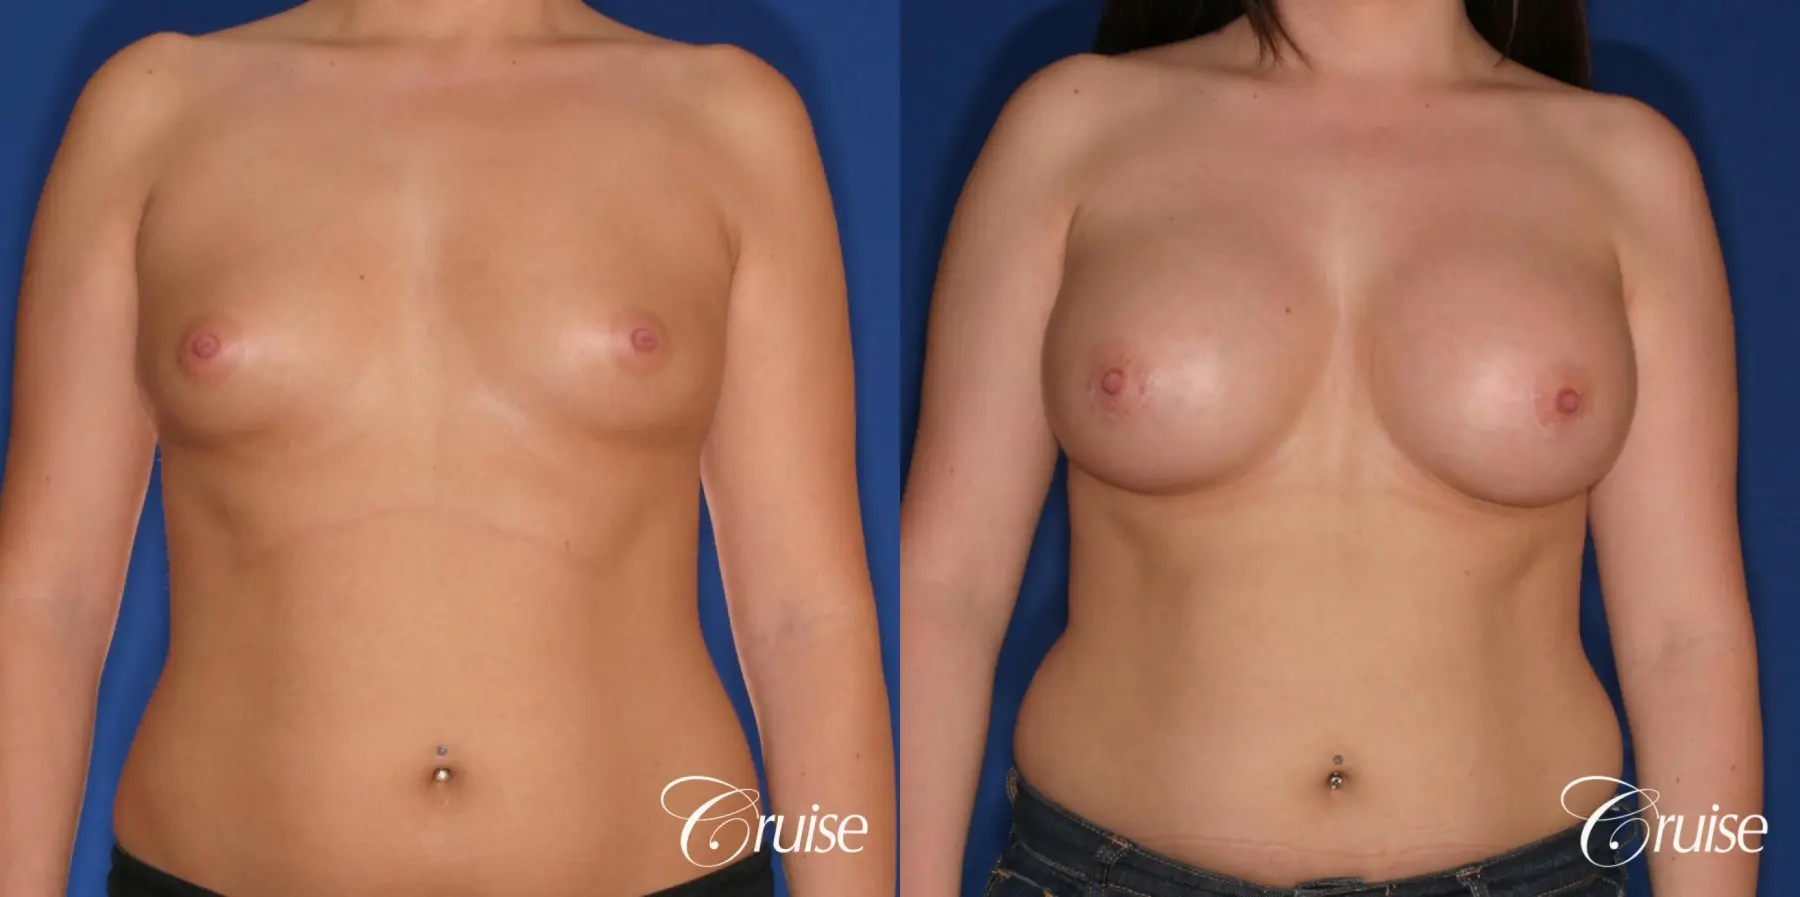 Breast Augmentation - Before and After 1